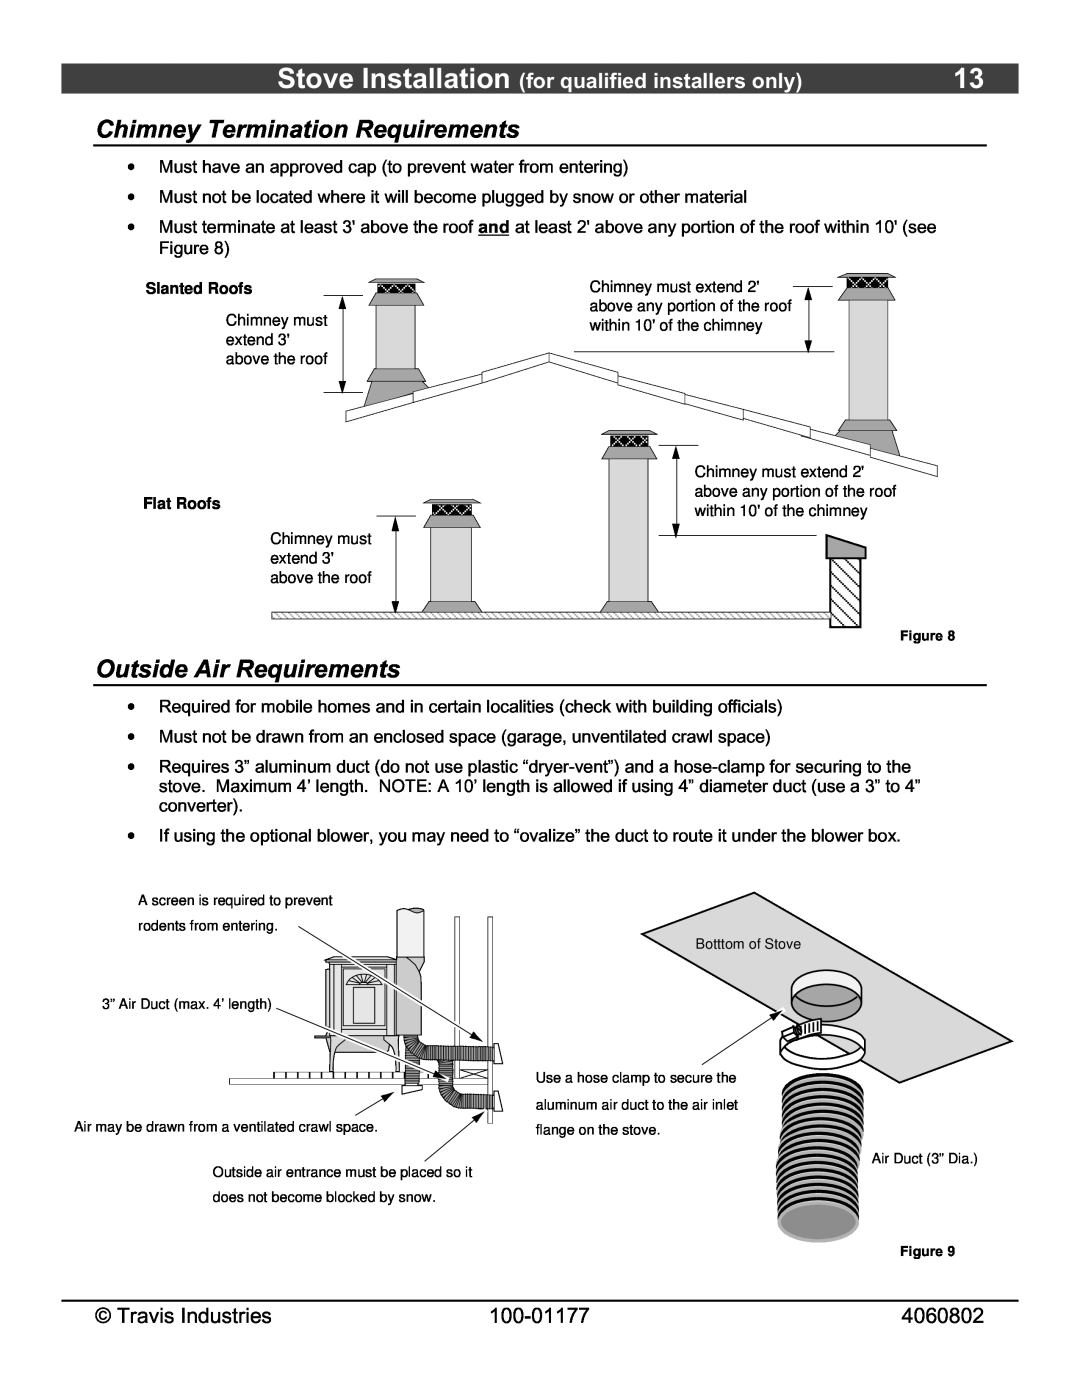 Lopi 028-S-75-2 owner manual Chimney Termination Requirements, Outside Air Requirements, Slanted Roofs, Flat 